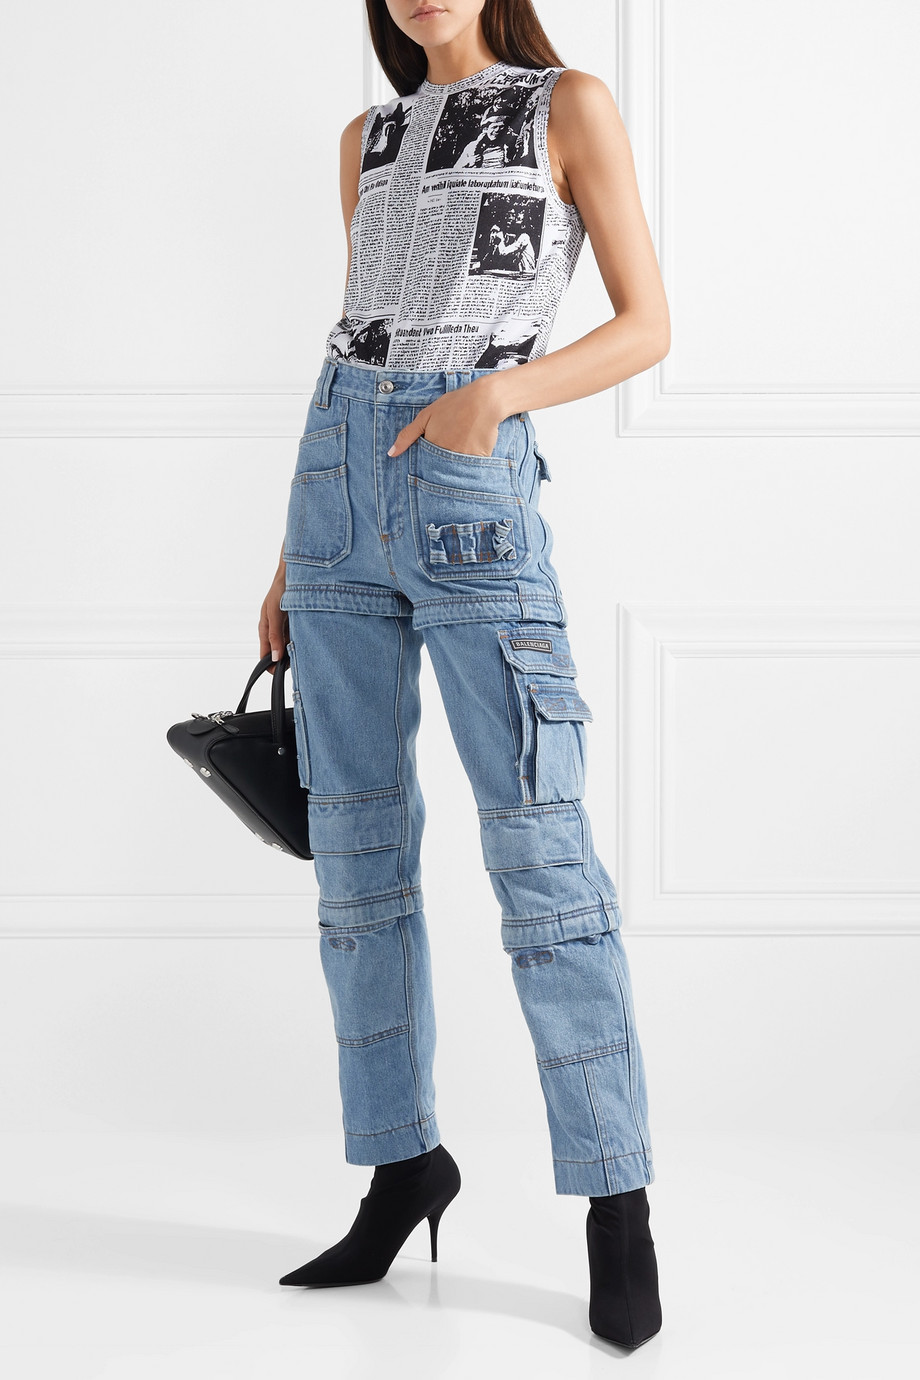 BALENCIAGA - CONVERTIBLE HIGH-RISE JEANS | THE UNTITLED BOUTIQUE